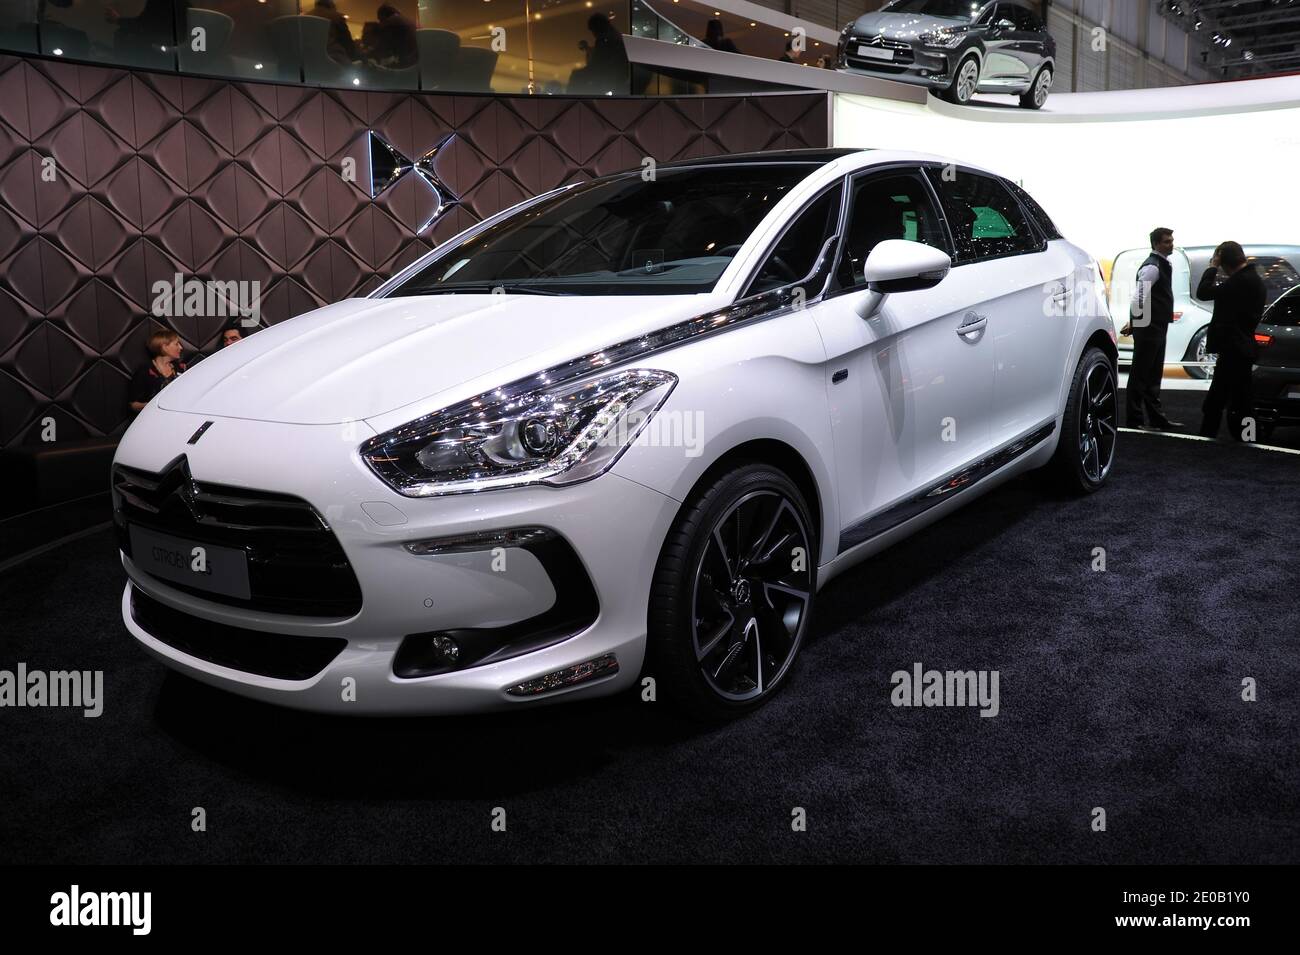 Citroen DS5 on display at the 82nd International Motor Show and Accessories  of Geneva, Switzerland on March 7, 2012. Photo by Loona/ABACAPRESS.COM  Stock Photo - Alamy